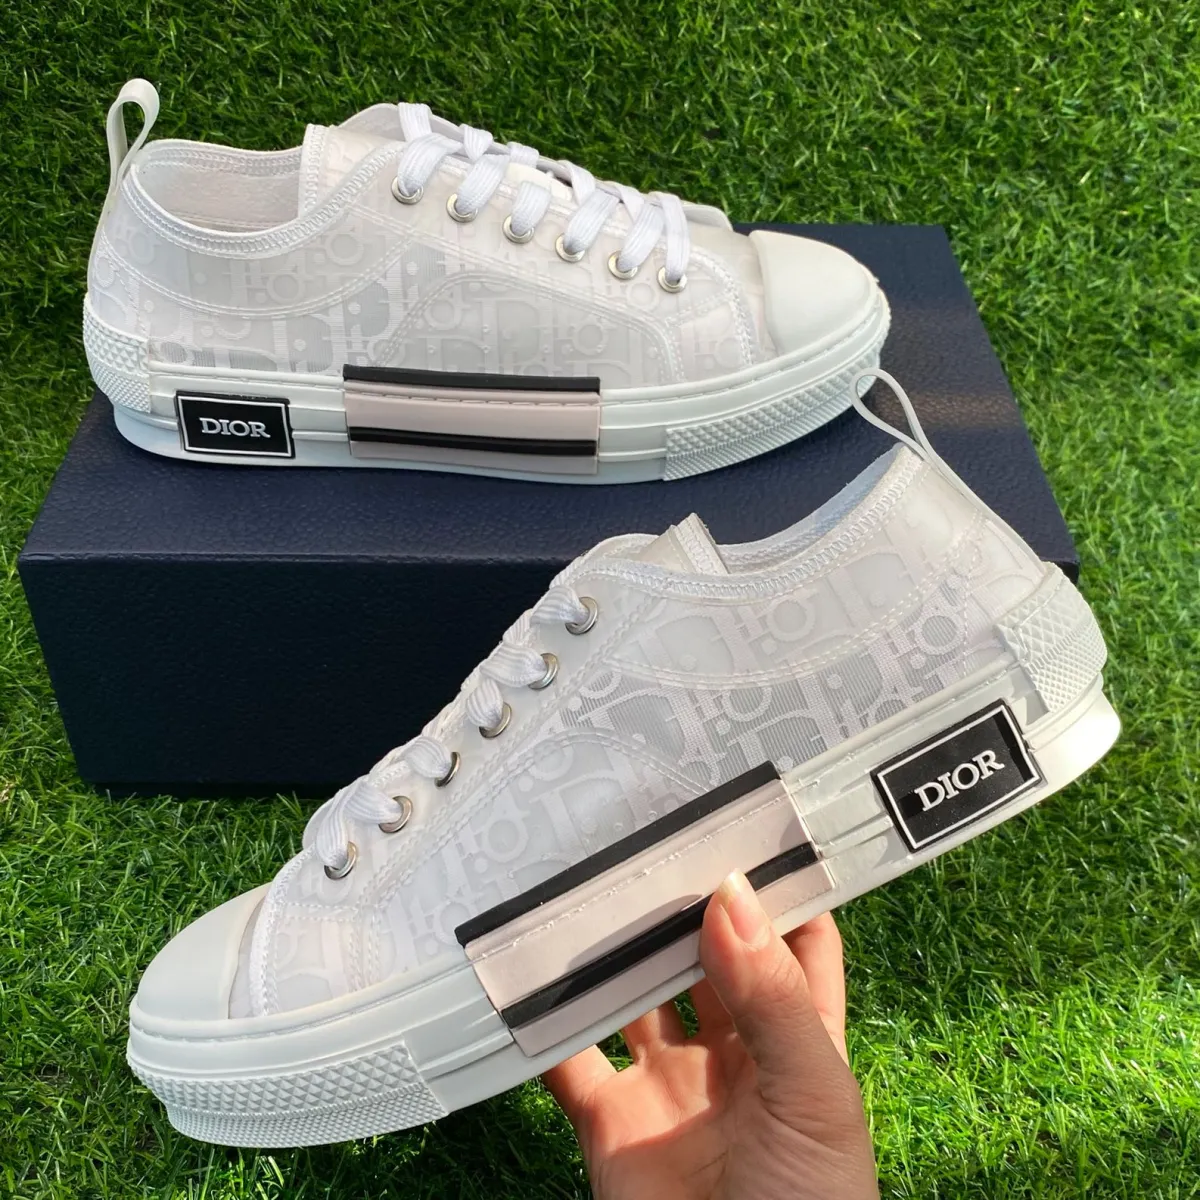 GIÀY NAM DIOR B23 LOW TOP SNEAKERS CHUẨN 11 AUTHENTIC HEAVEN SHOP  SINCE  2013 